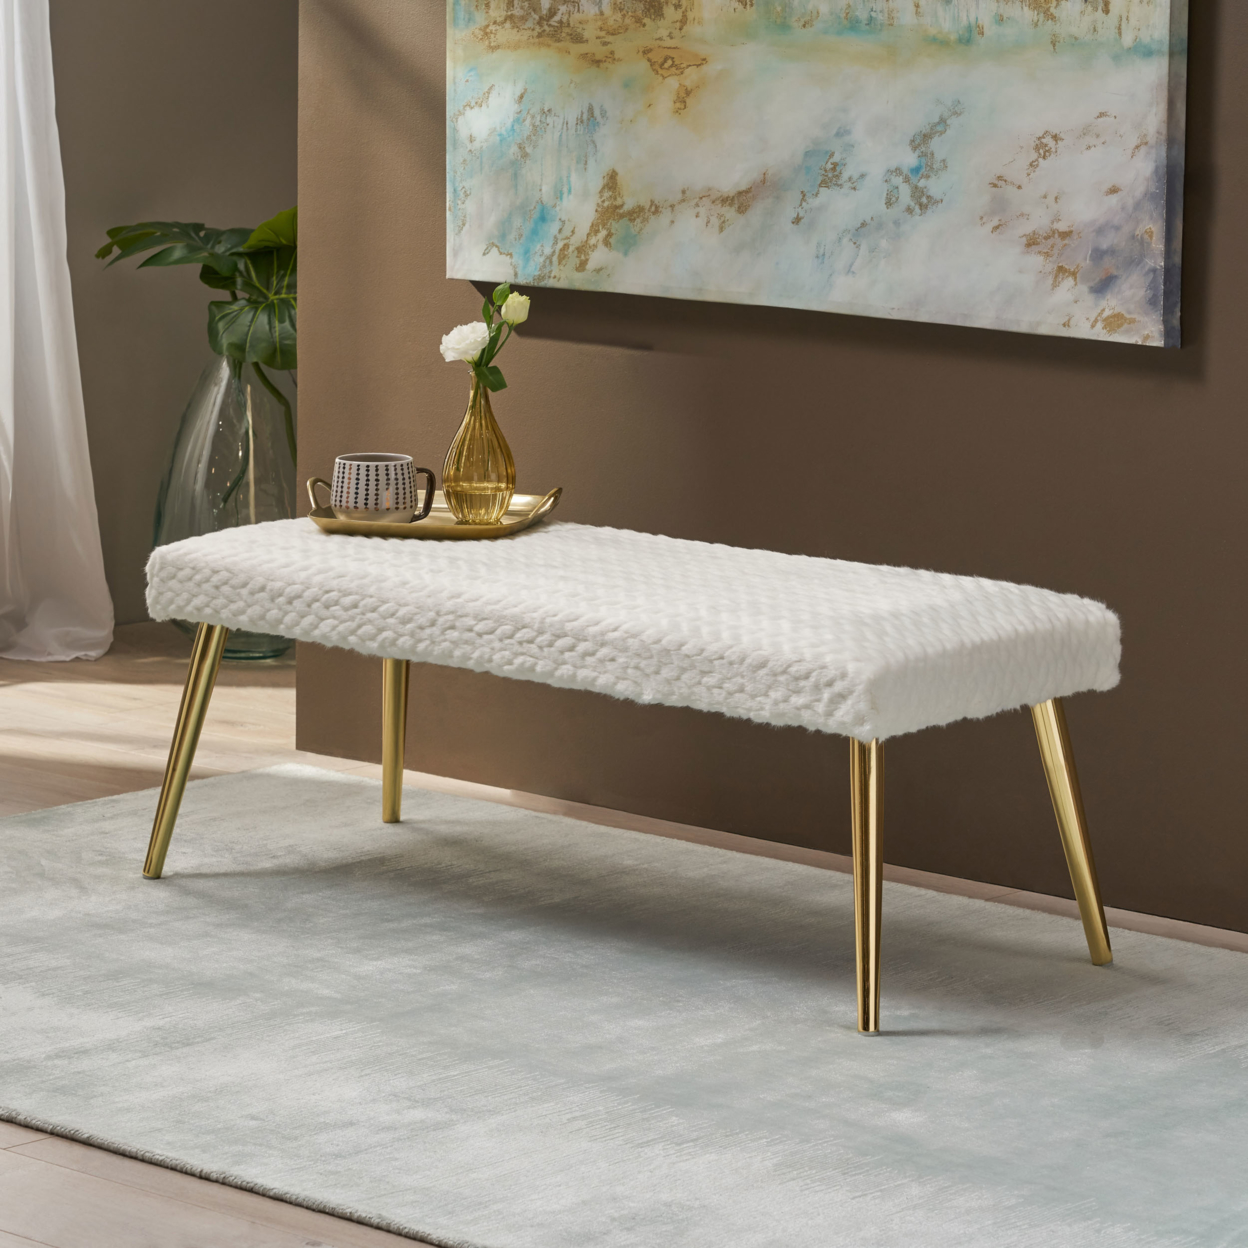 Indira Patterned Faux Fur Bench - Taupe + Gold Finish